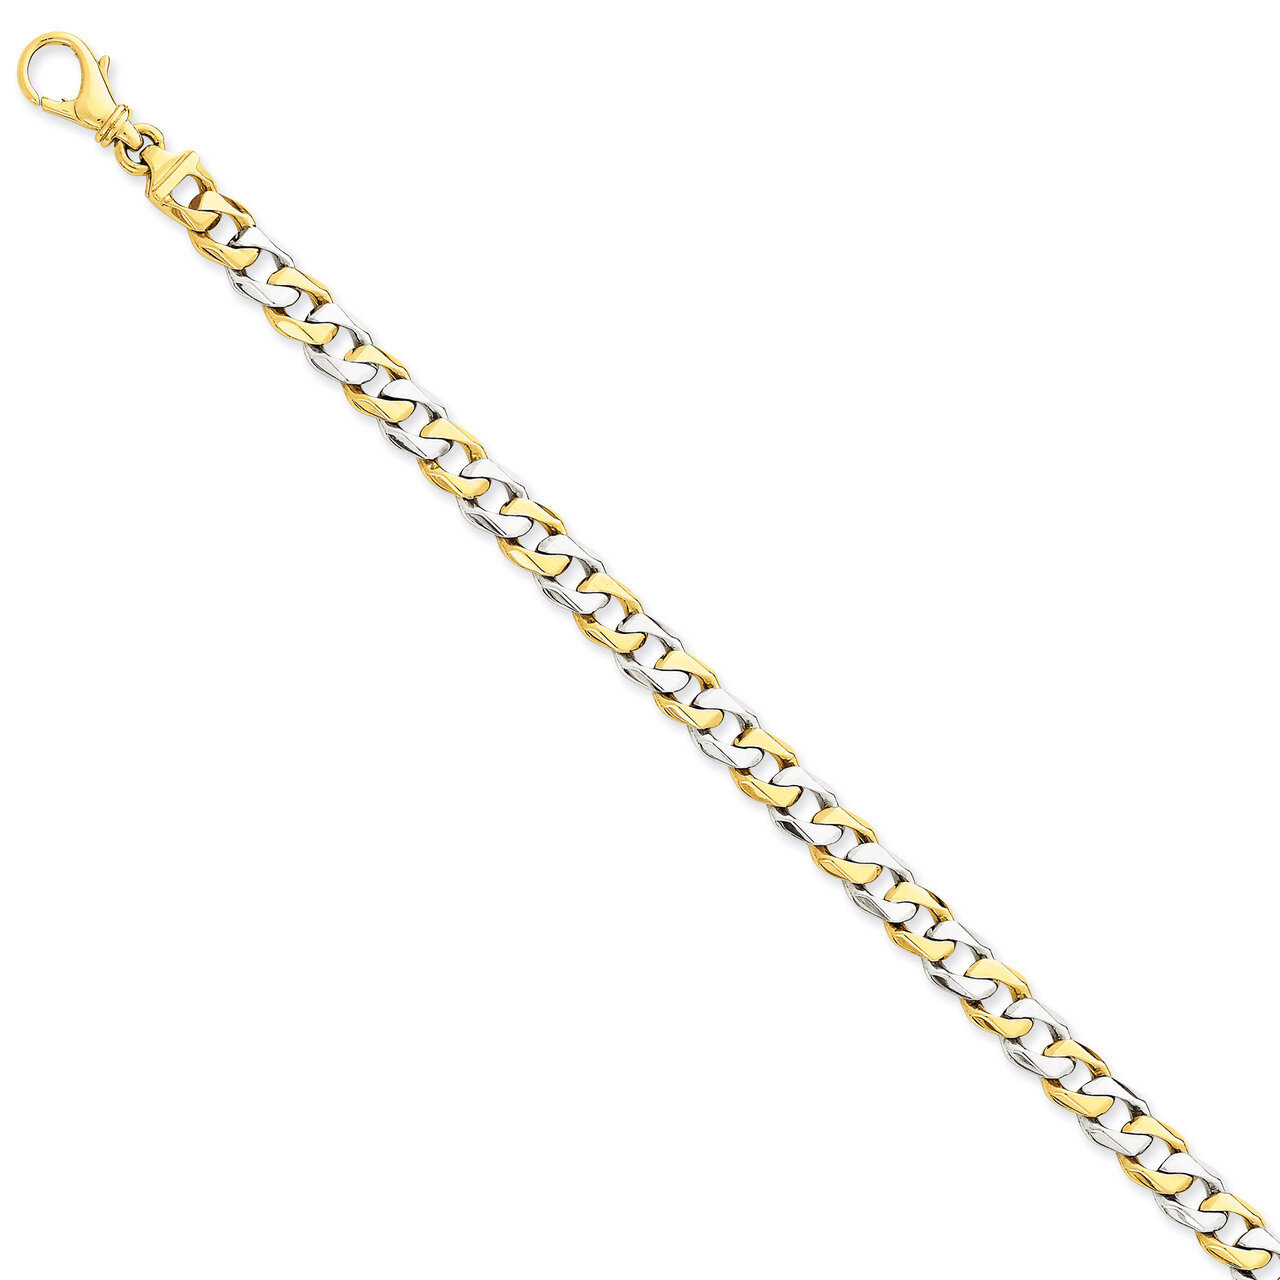 6.85mm Polished Fancy Link Chain 9 Inch 14k Two-Tone Gold LK517-9